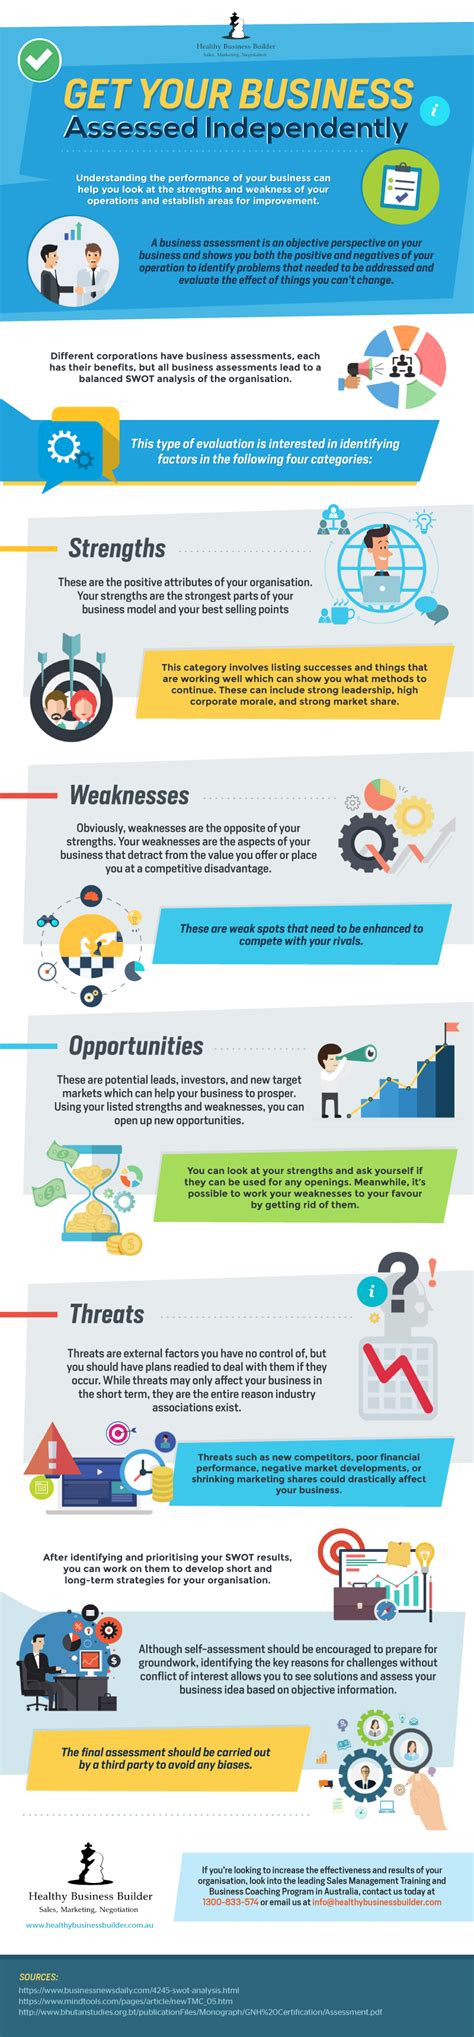 Get Your Business Assessed Independently Infographic